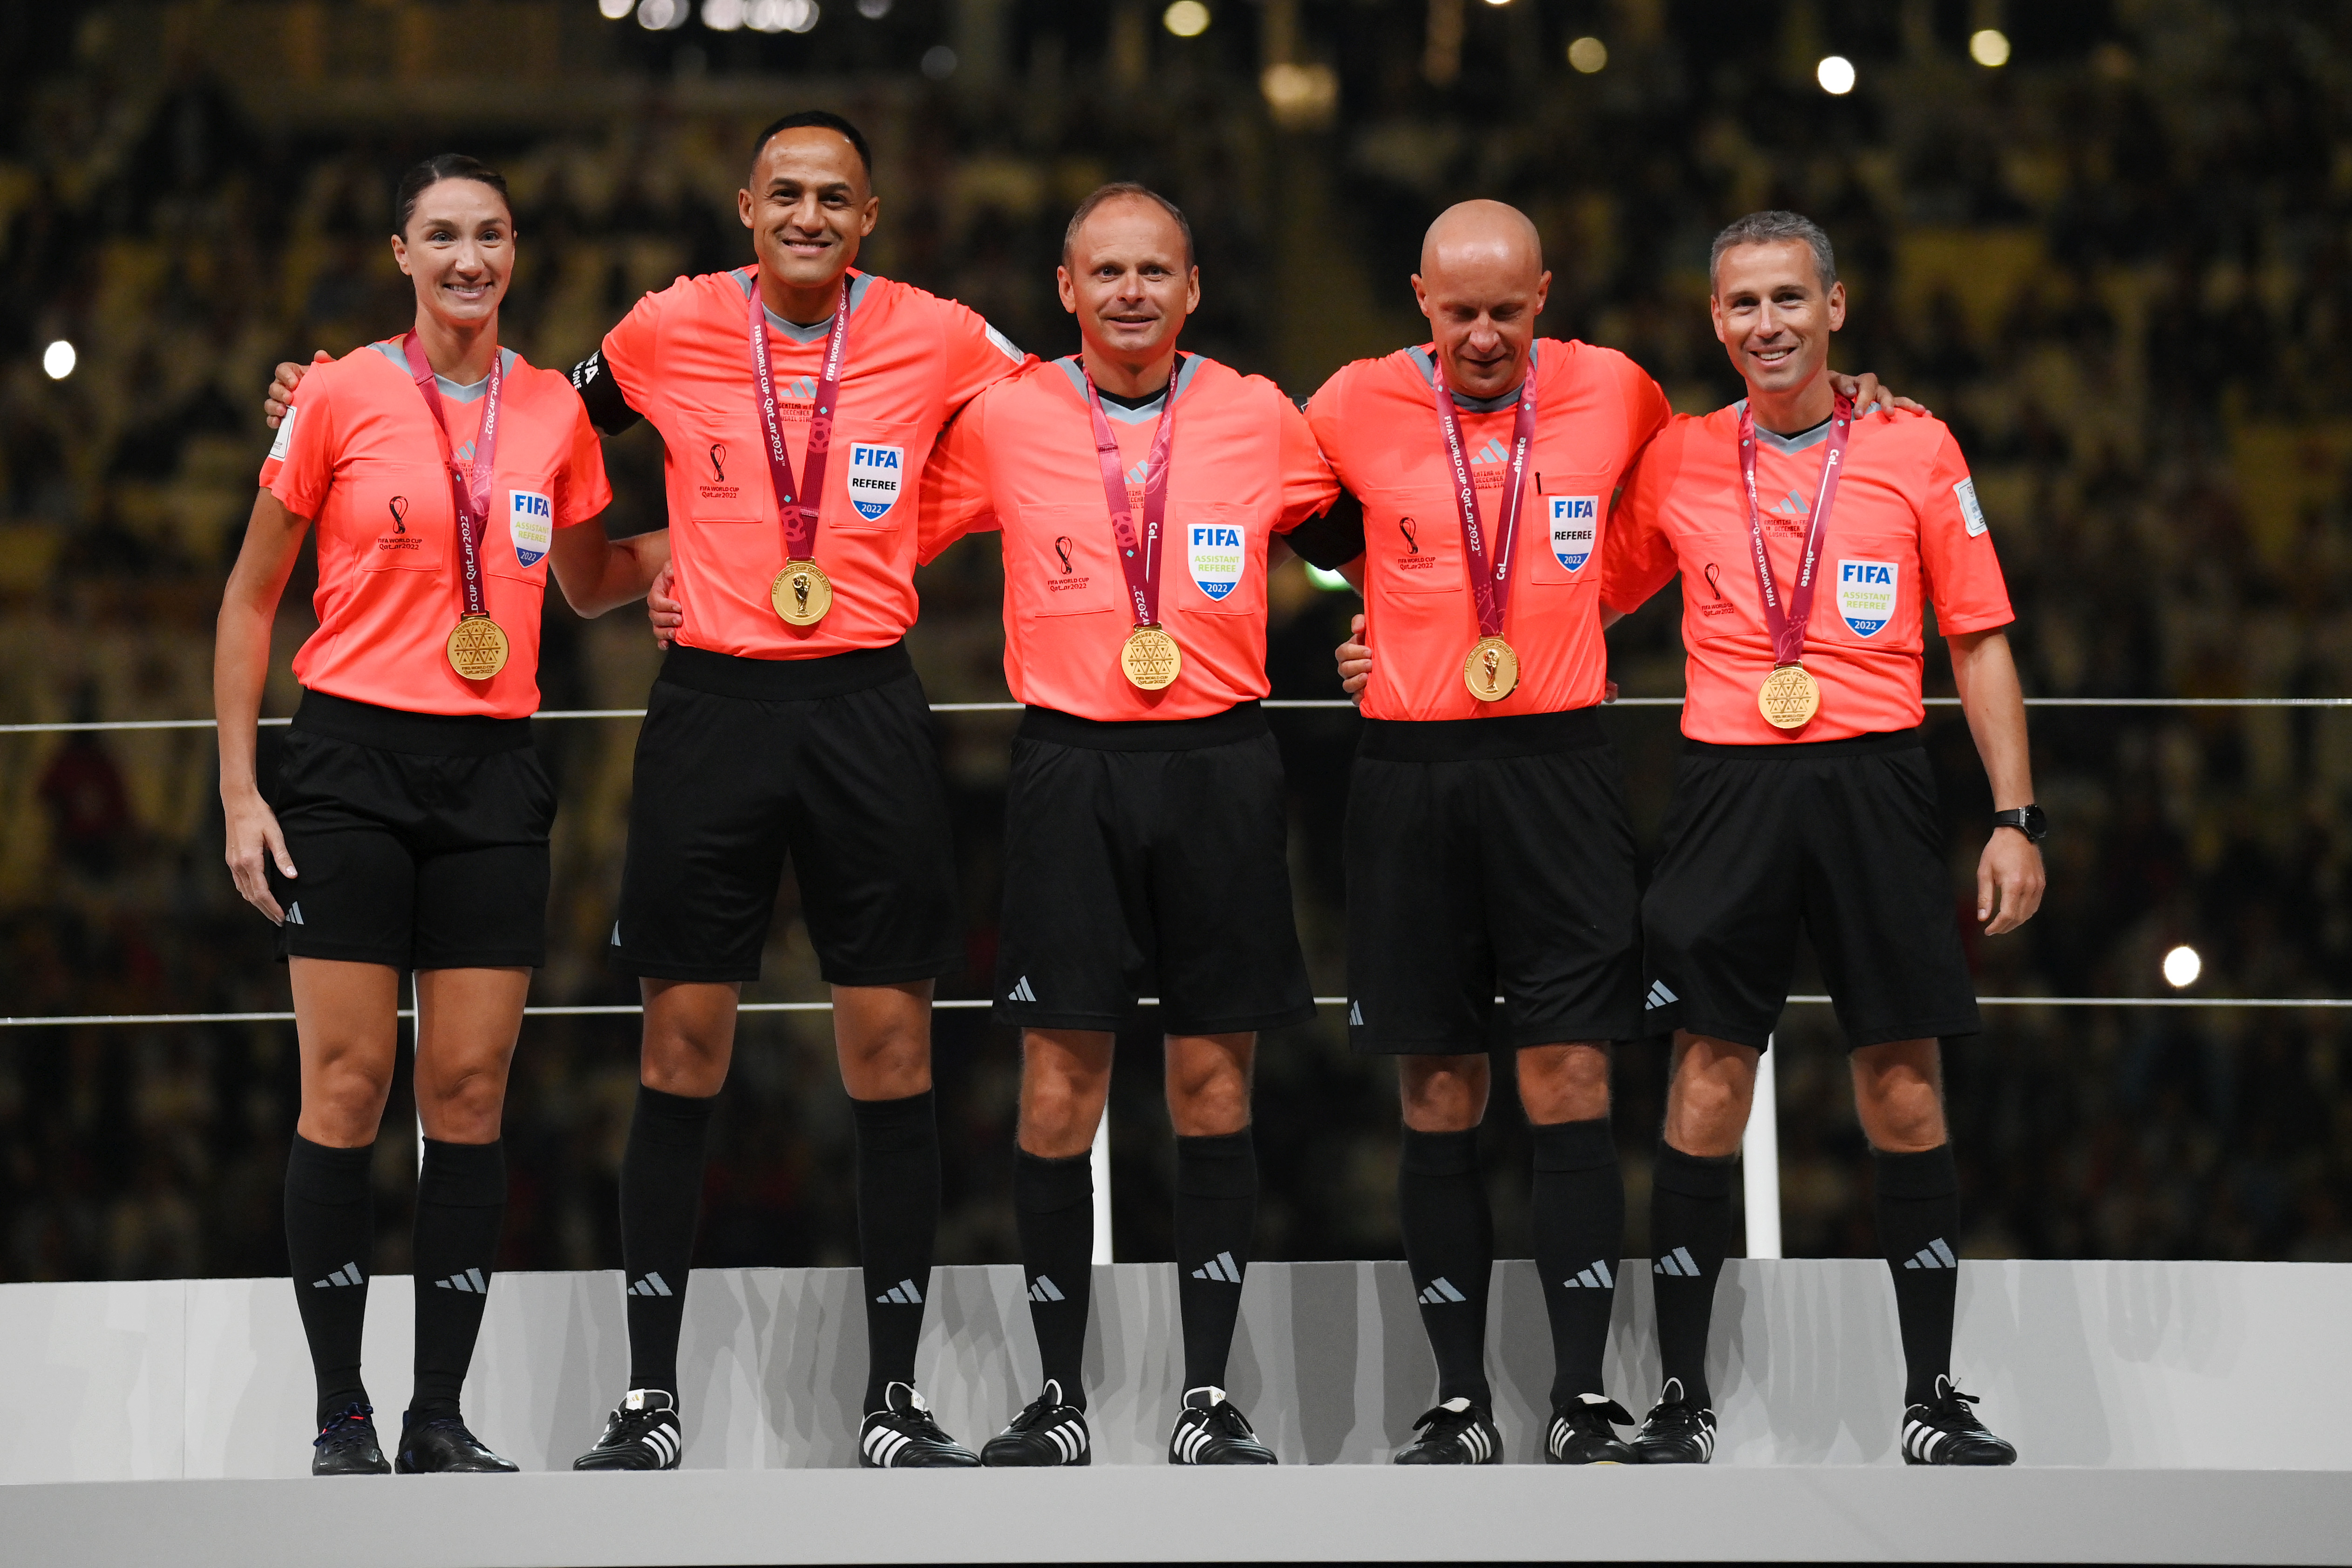 Match officials pose for a photo during the awards ceremony after the FIFA World Cup Qatar 2022 Final match between Argentina and France at Lusail Stadium on December 18, 2022 in Lusail City, Qatar.